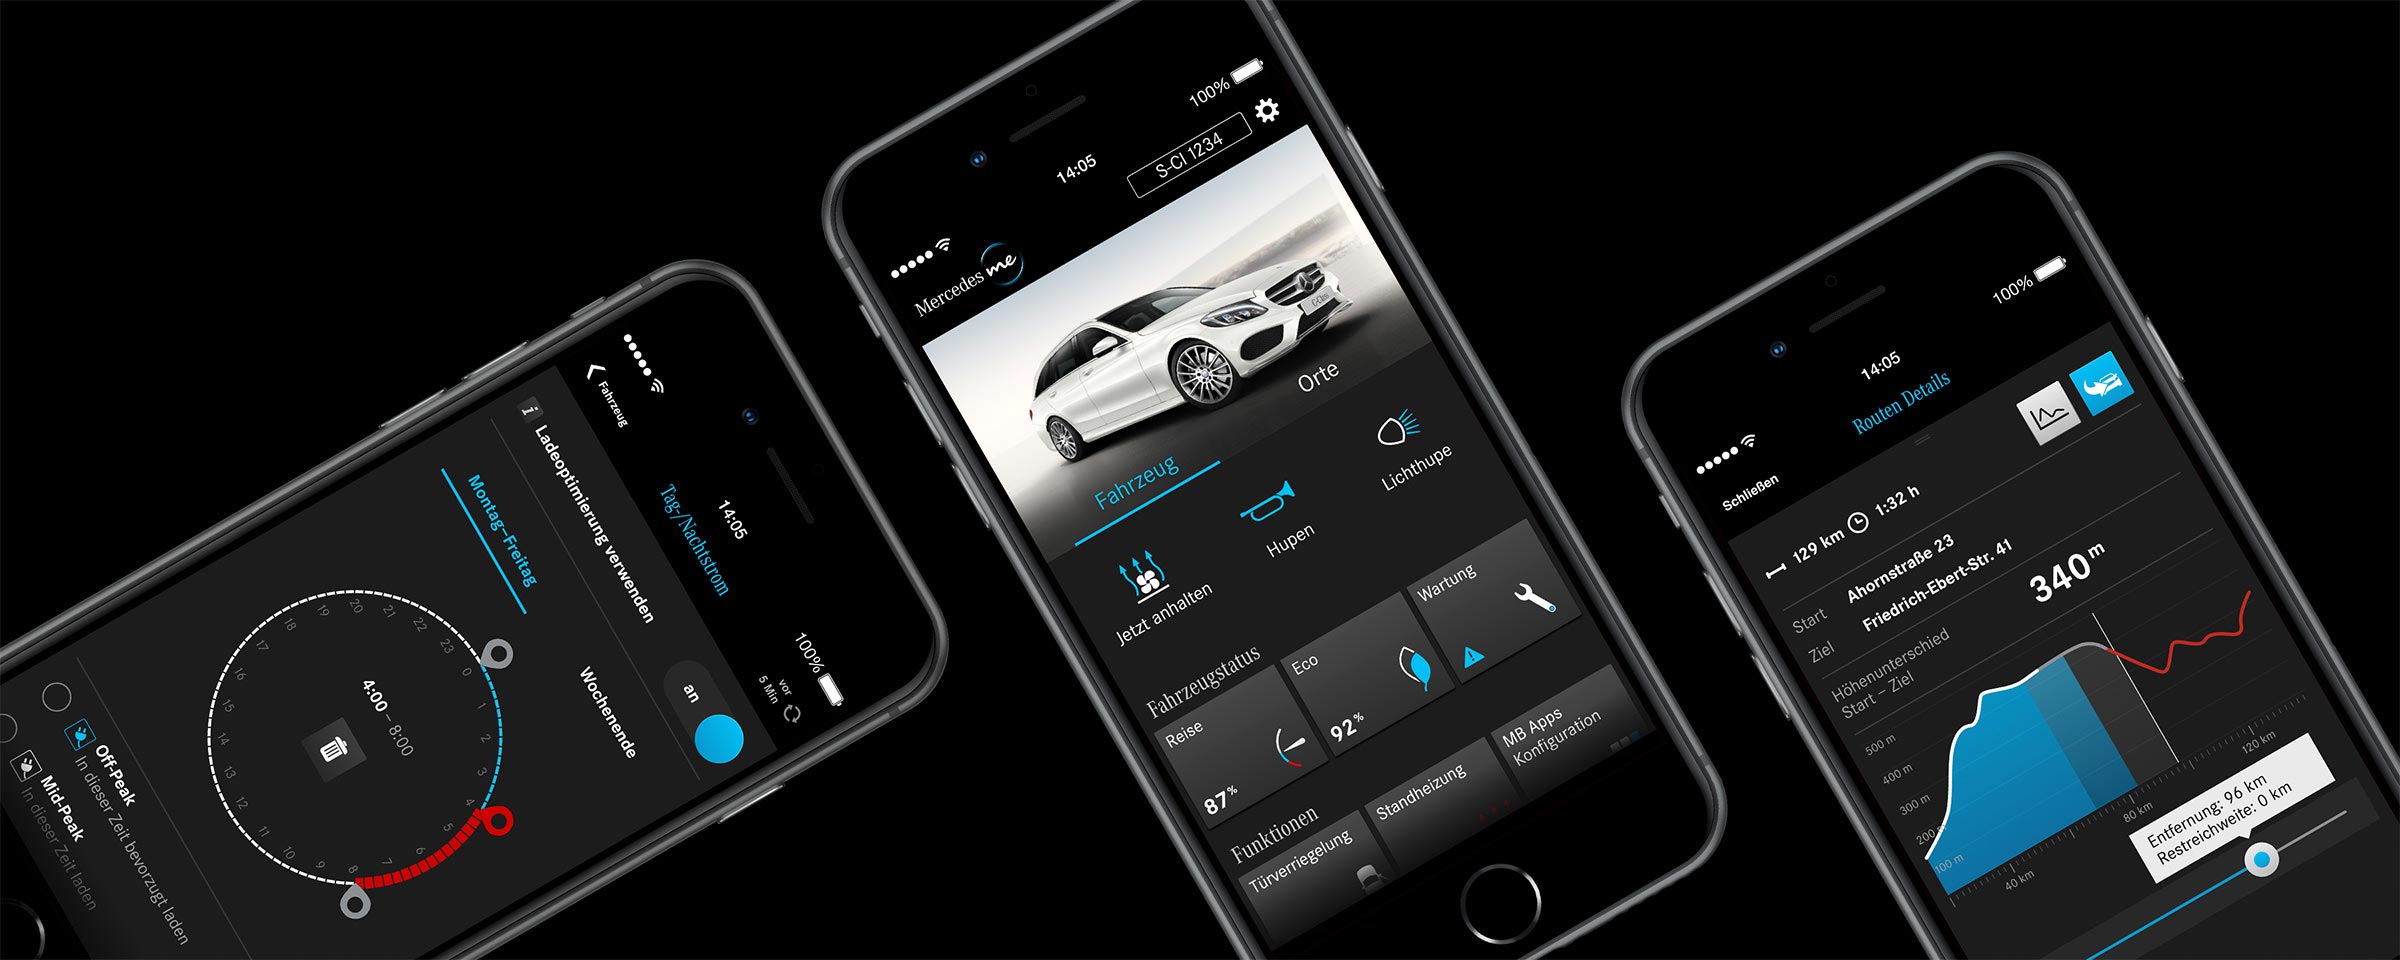 Mercedes me connect App shows day/night power overview, dashboard and route details